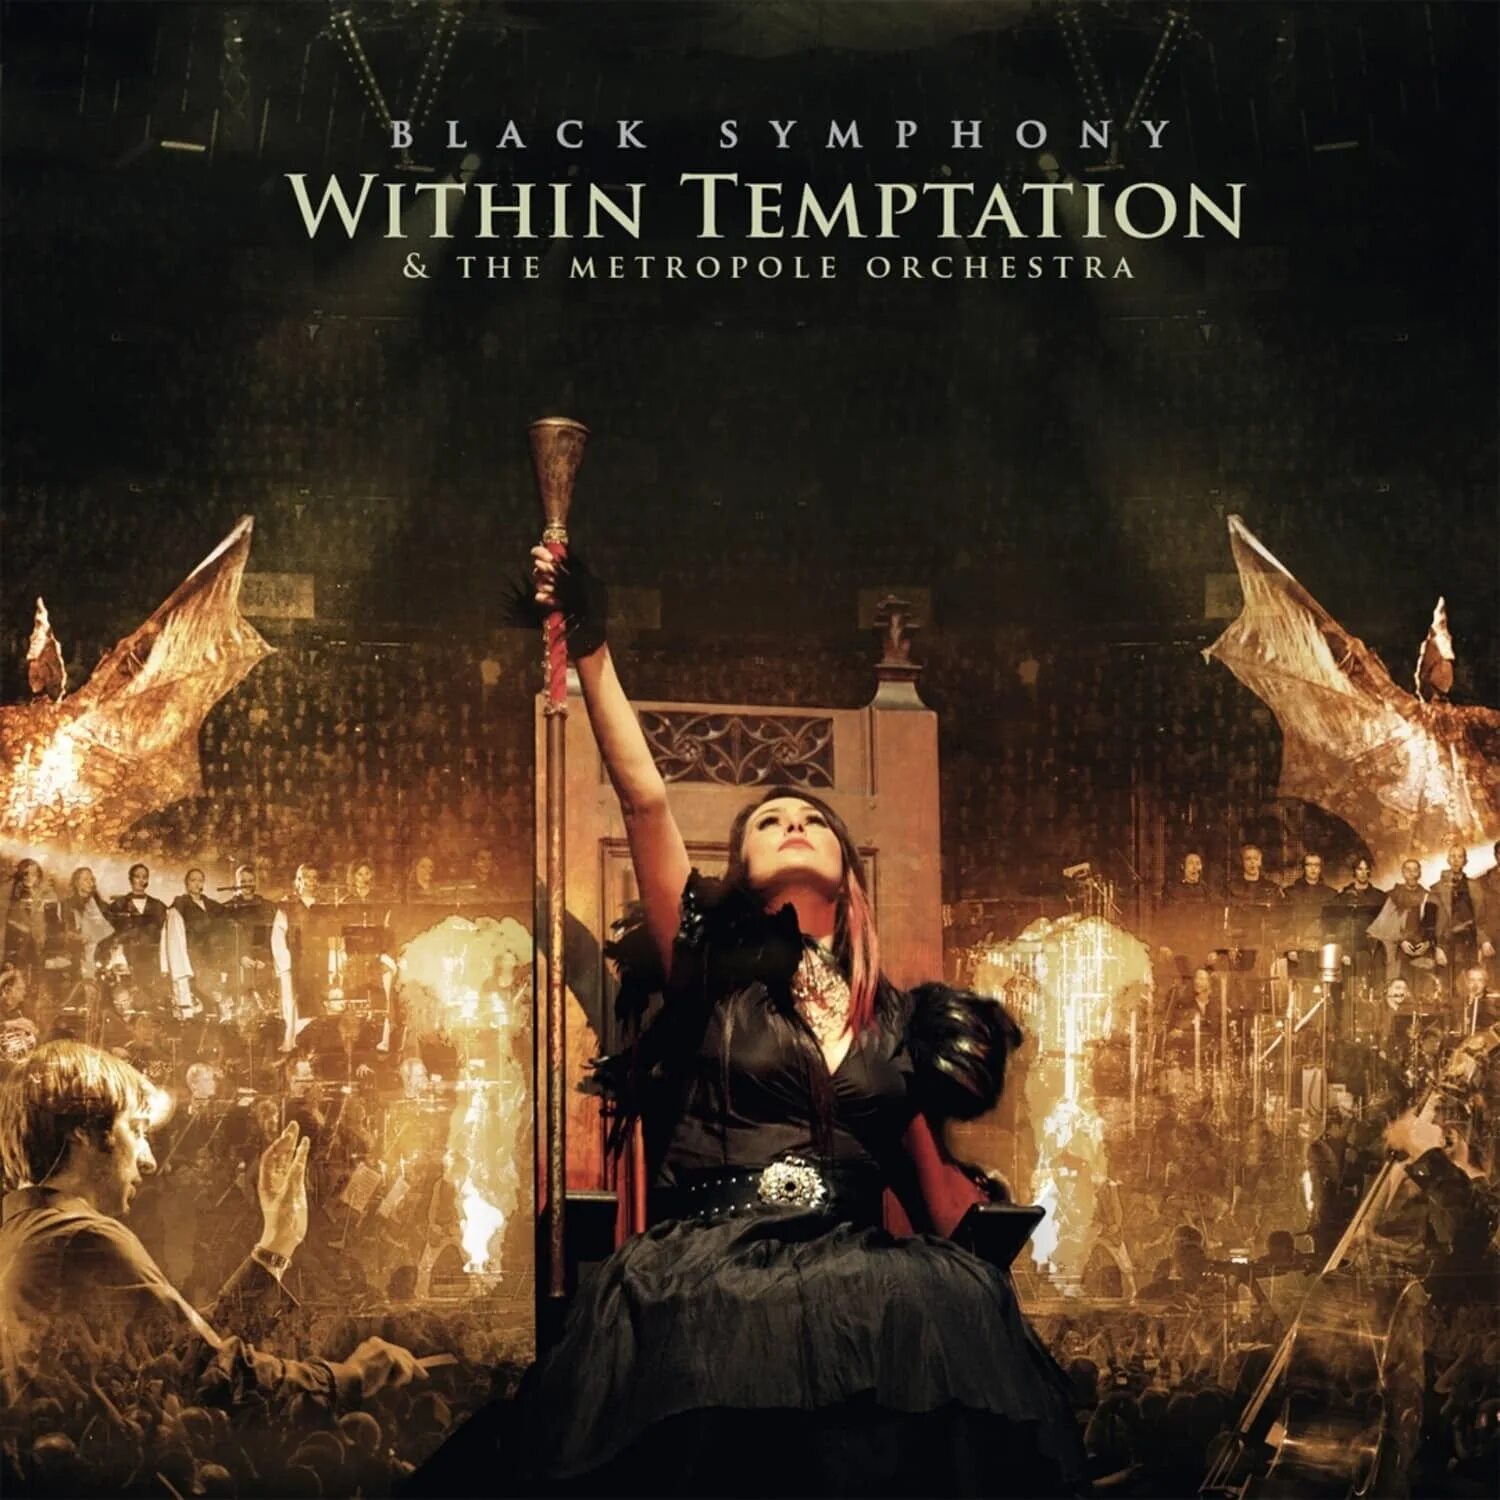 Within temptation альбомы. Within Temptation Black Symphony. Black Symphony within Temptation концерт. Within Temptation - Black Symphony обложка диска. Within Temptation the Silent Force.